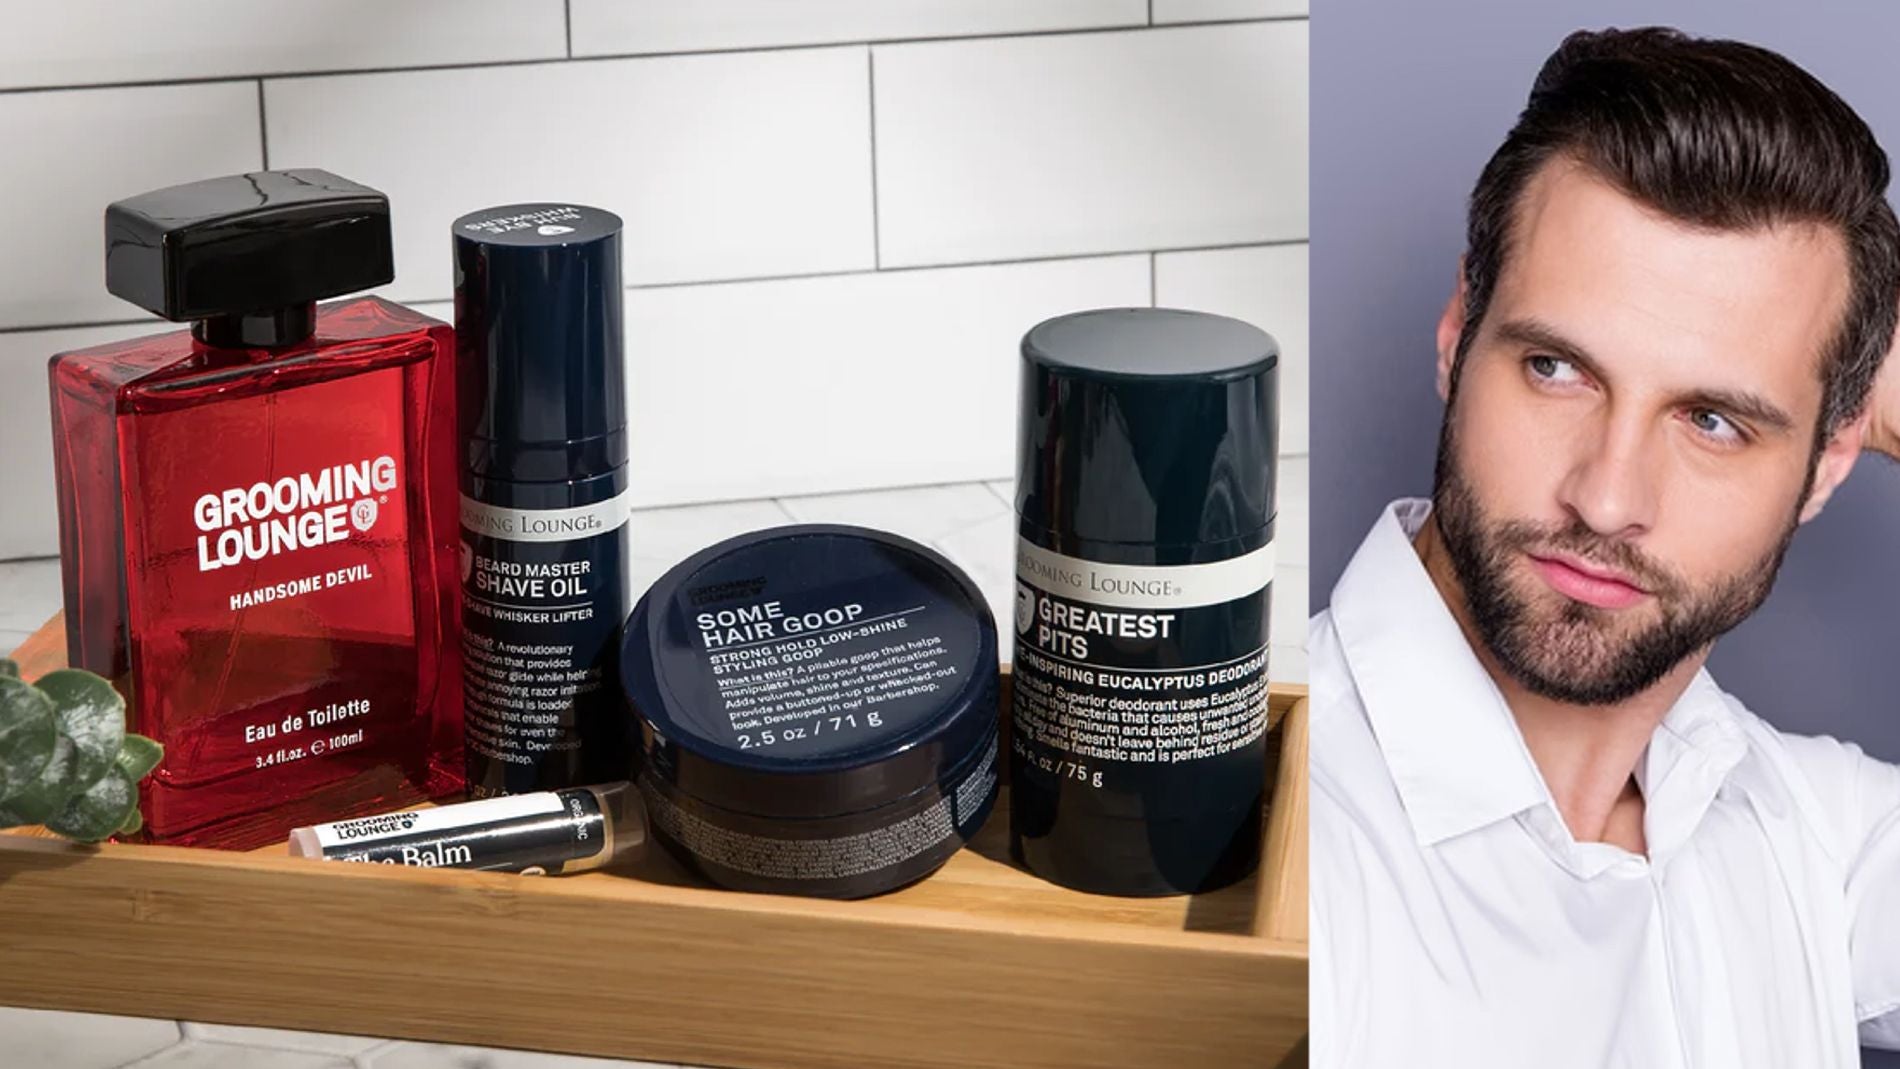 Grooming Lounge Fragrance, Skin Care, and Hair Care